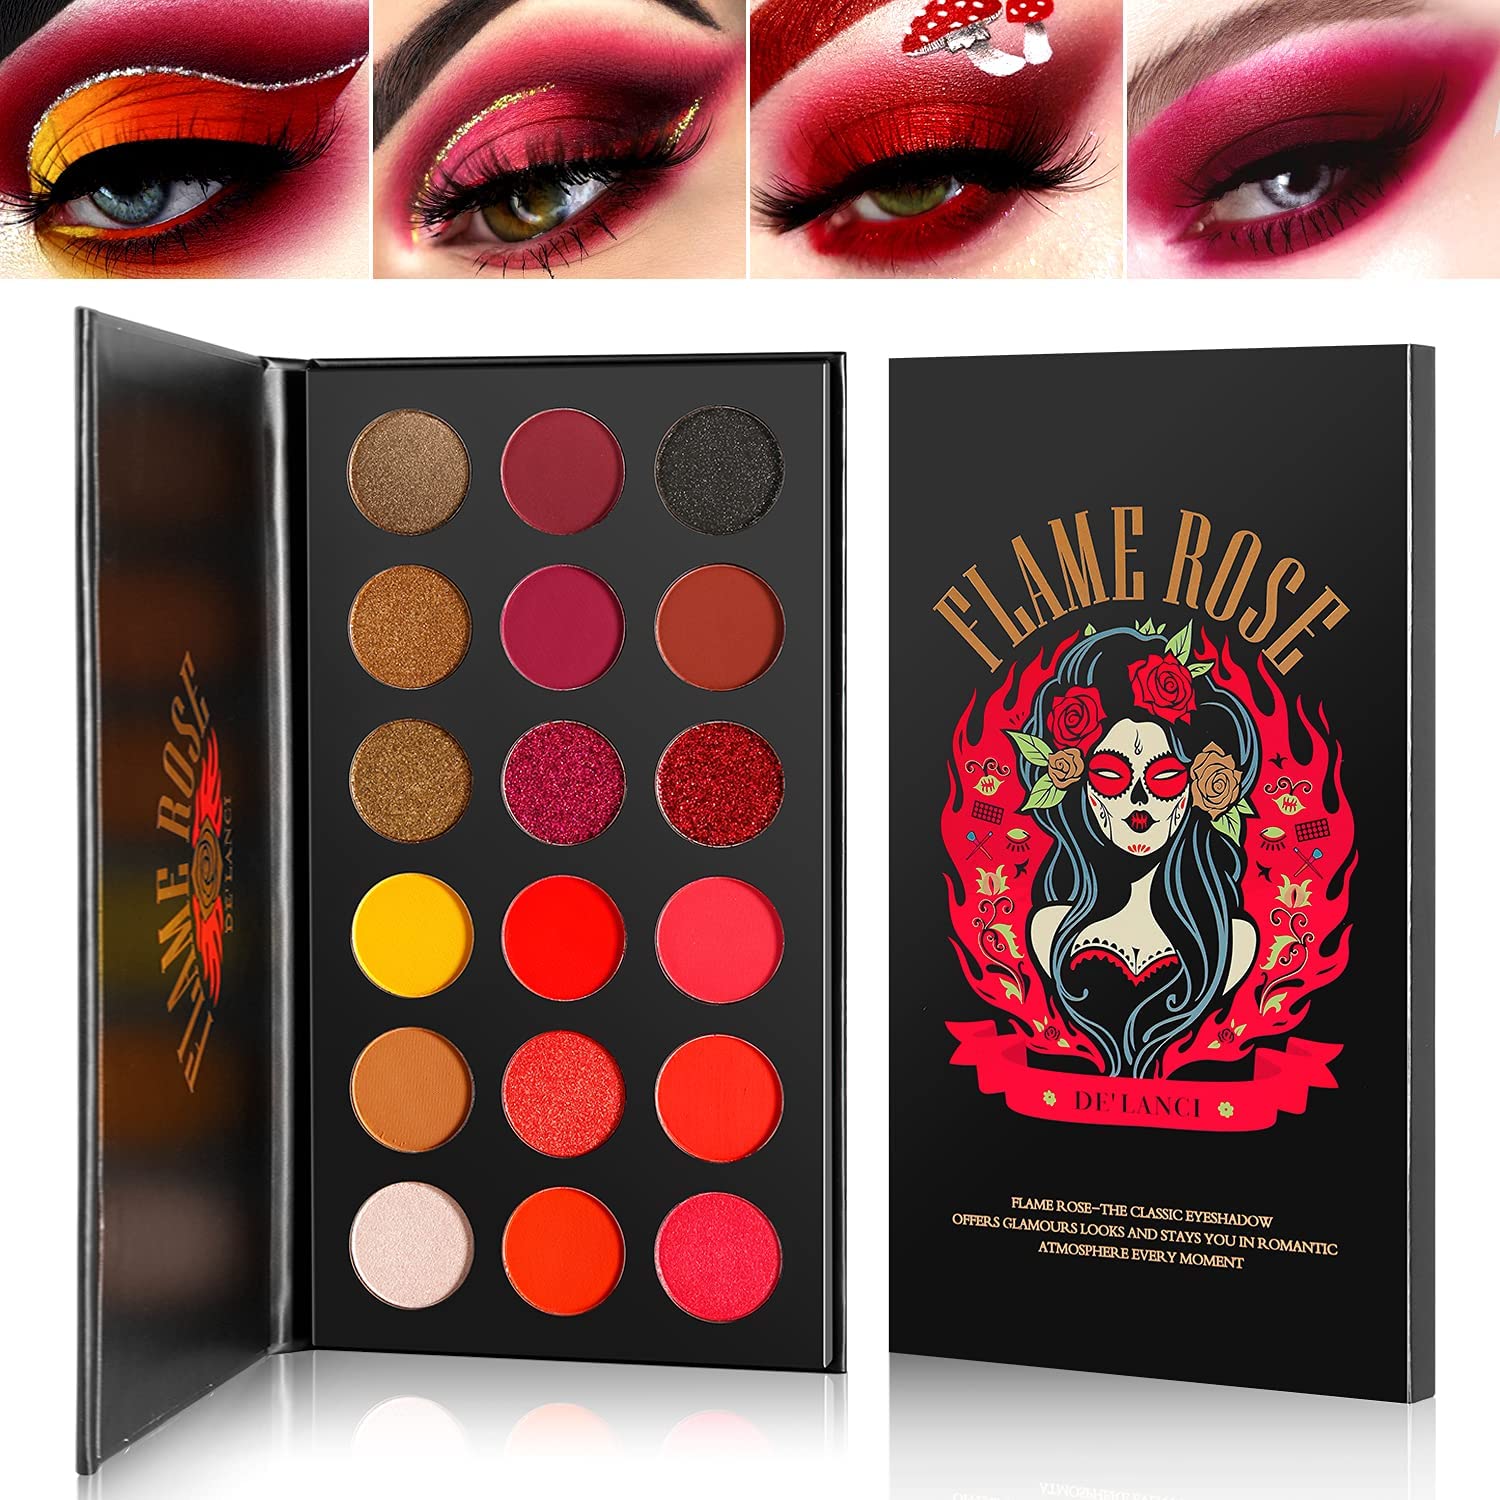 COSLUXE Red Eyeshadow Palette Highly Pigmented, DELANCI Long Lasting True Red Eye Shadow Halloween Makeup Pallet 18 Color,Waterproof Matte Shimmer Brown Black Yellow Sunset Warm Fall Eye Shades 